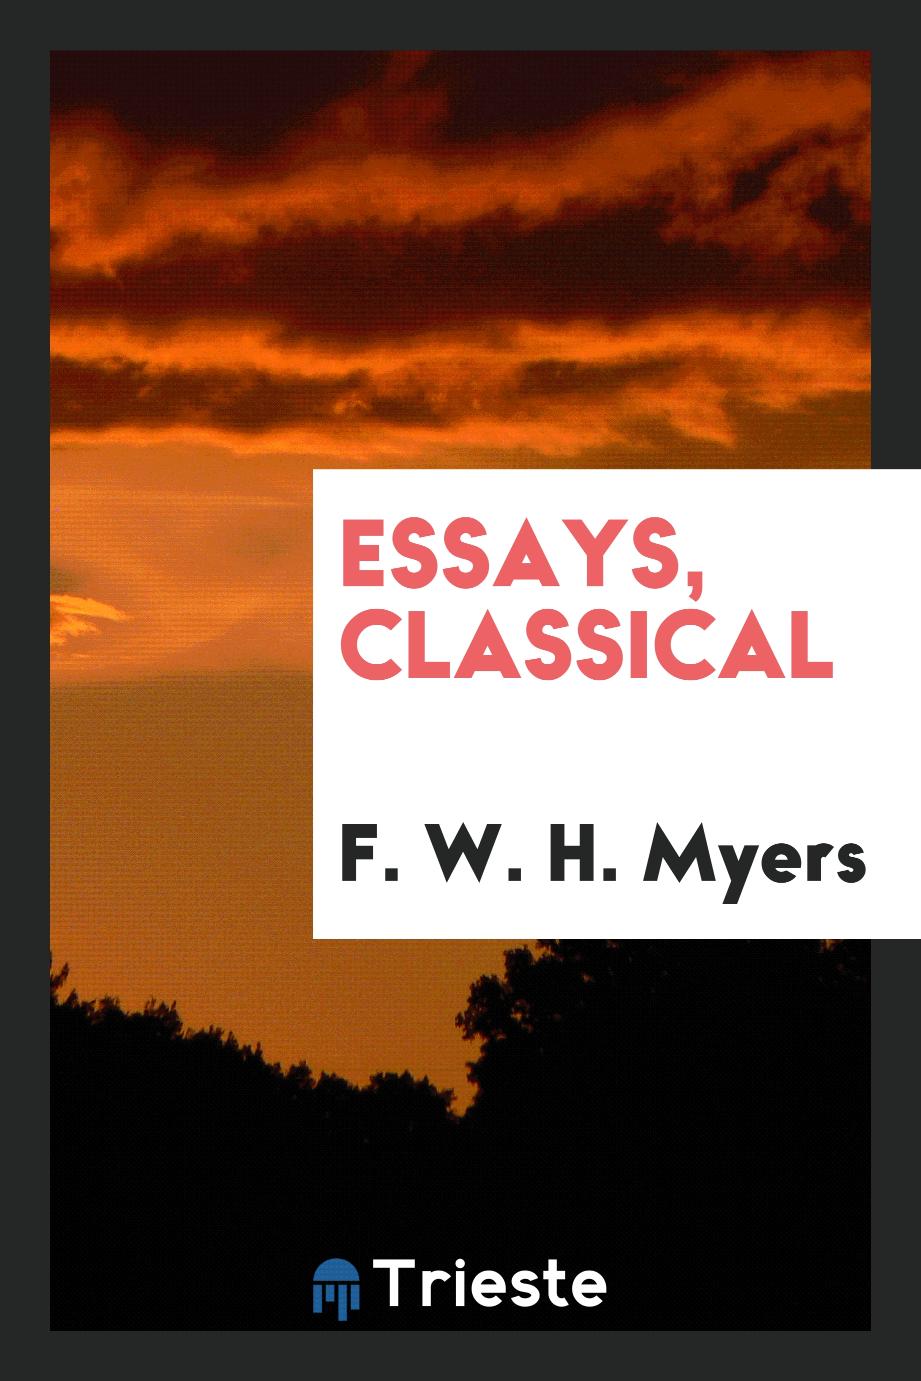 F. W. H. Myers - Essays, Classical